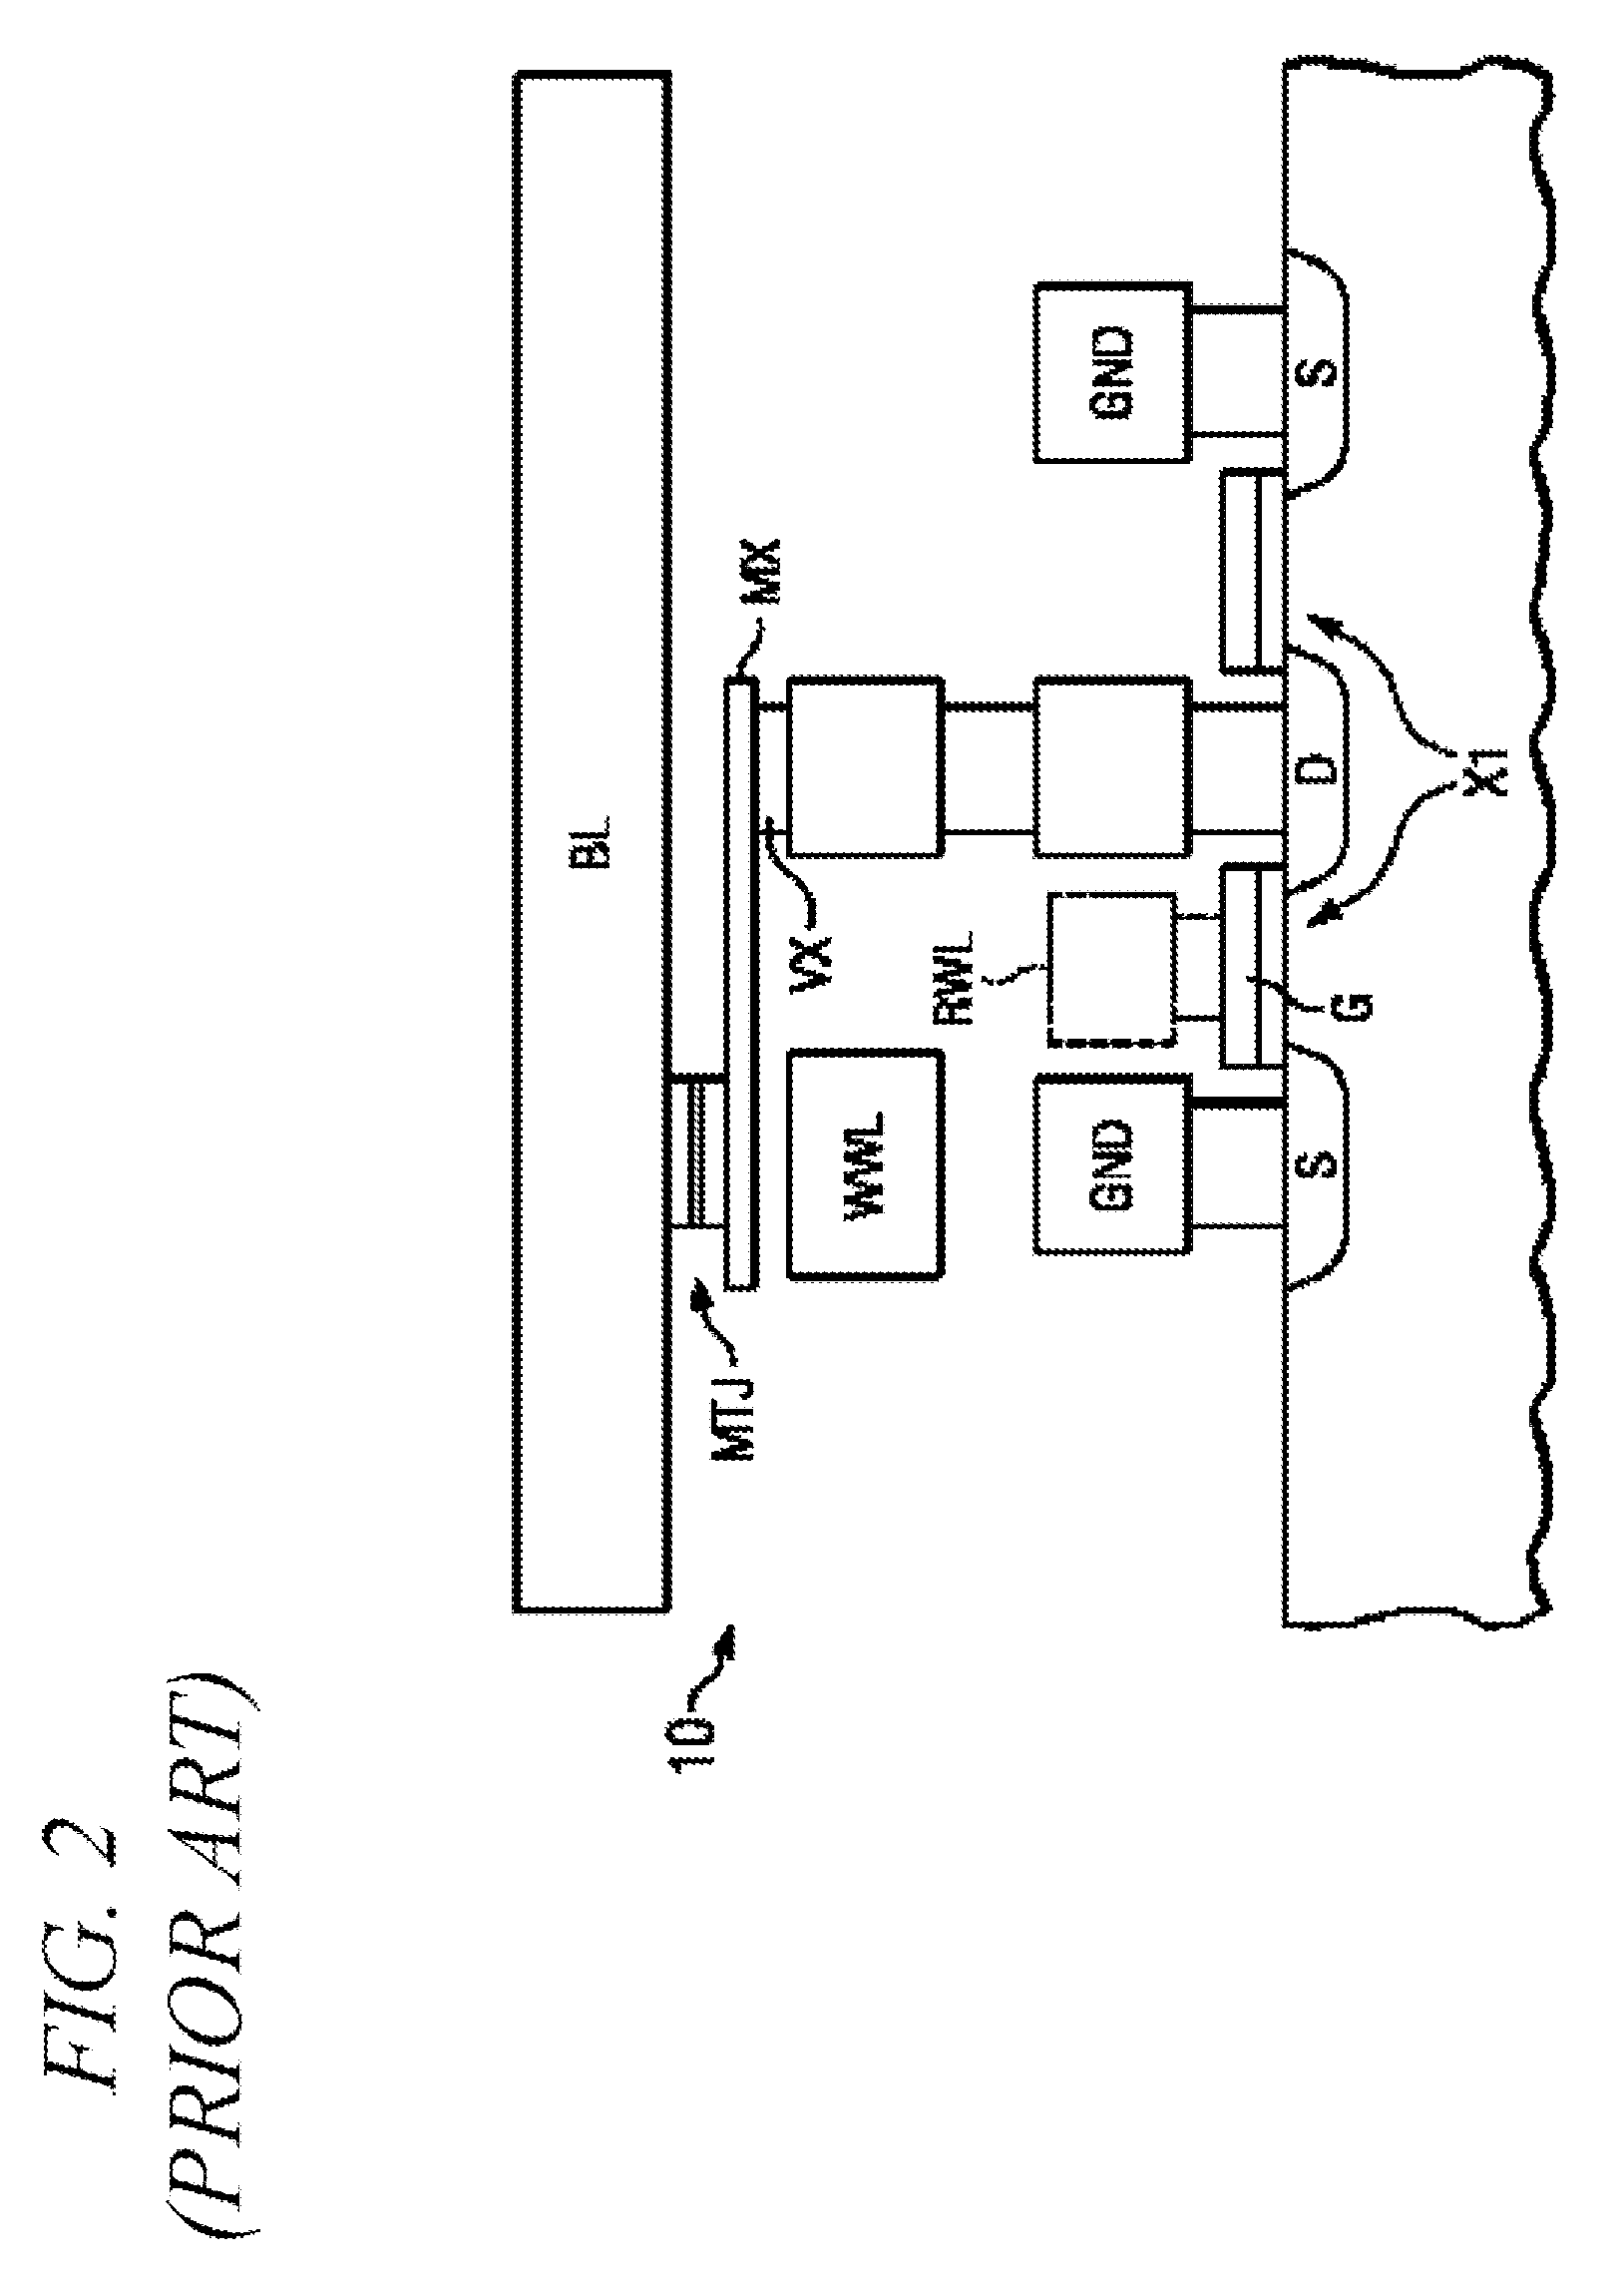 Integrated Circuit, Method of Operating an Integrated Circuit, Method of Manufacturing an Integrated Circuit, Memory Module, Stackable Memory Module